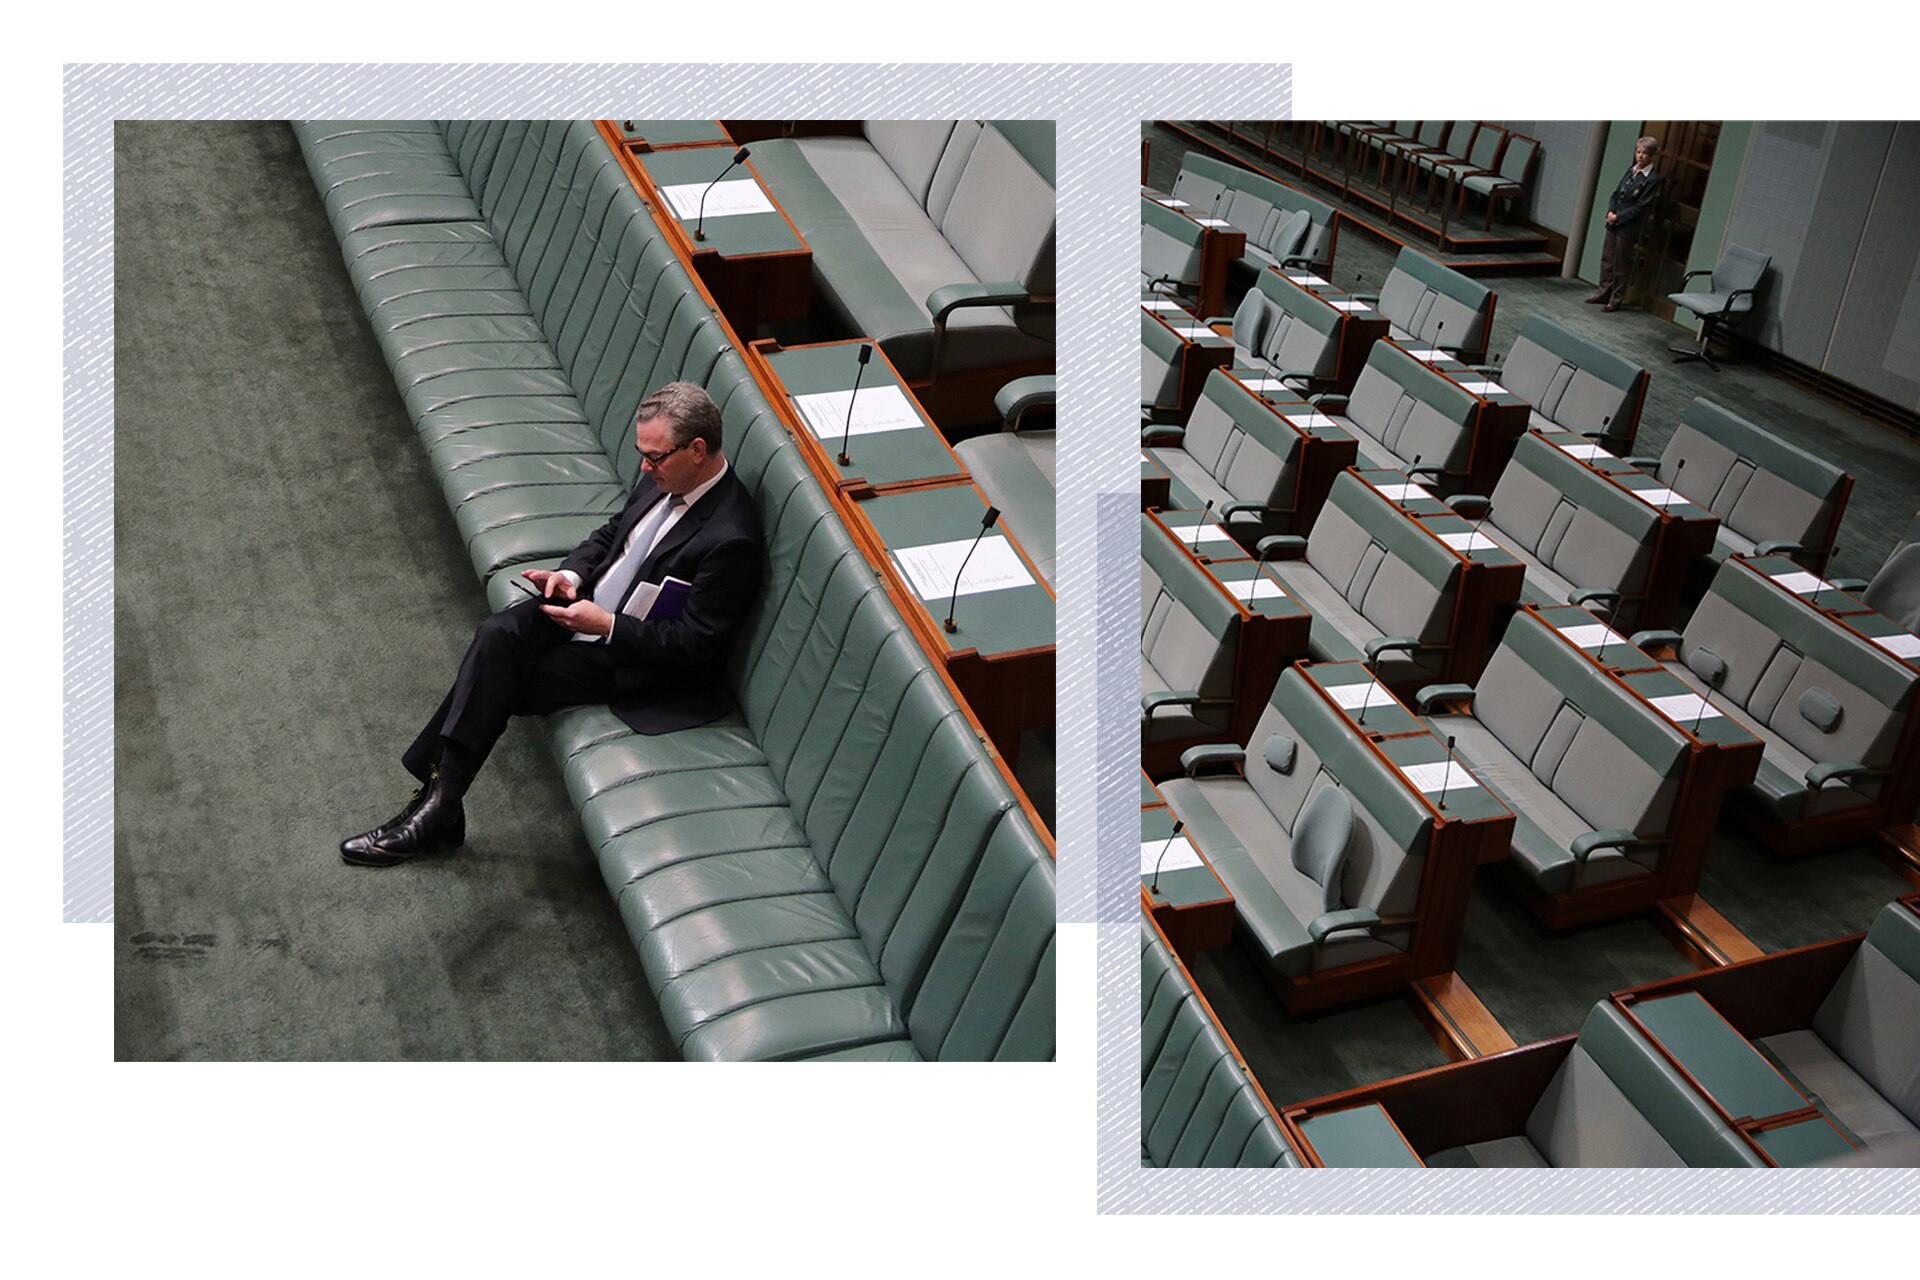 Christopher Pyne using his phone among empty seats .